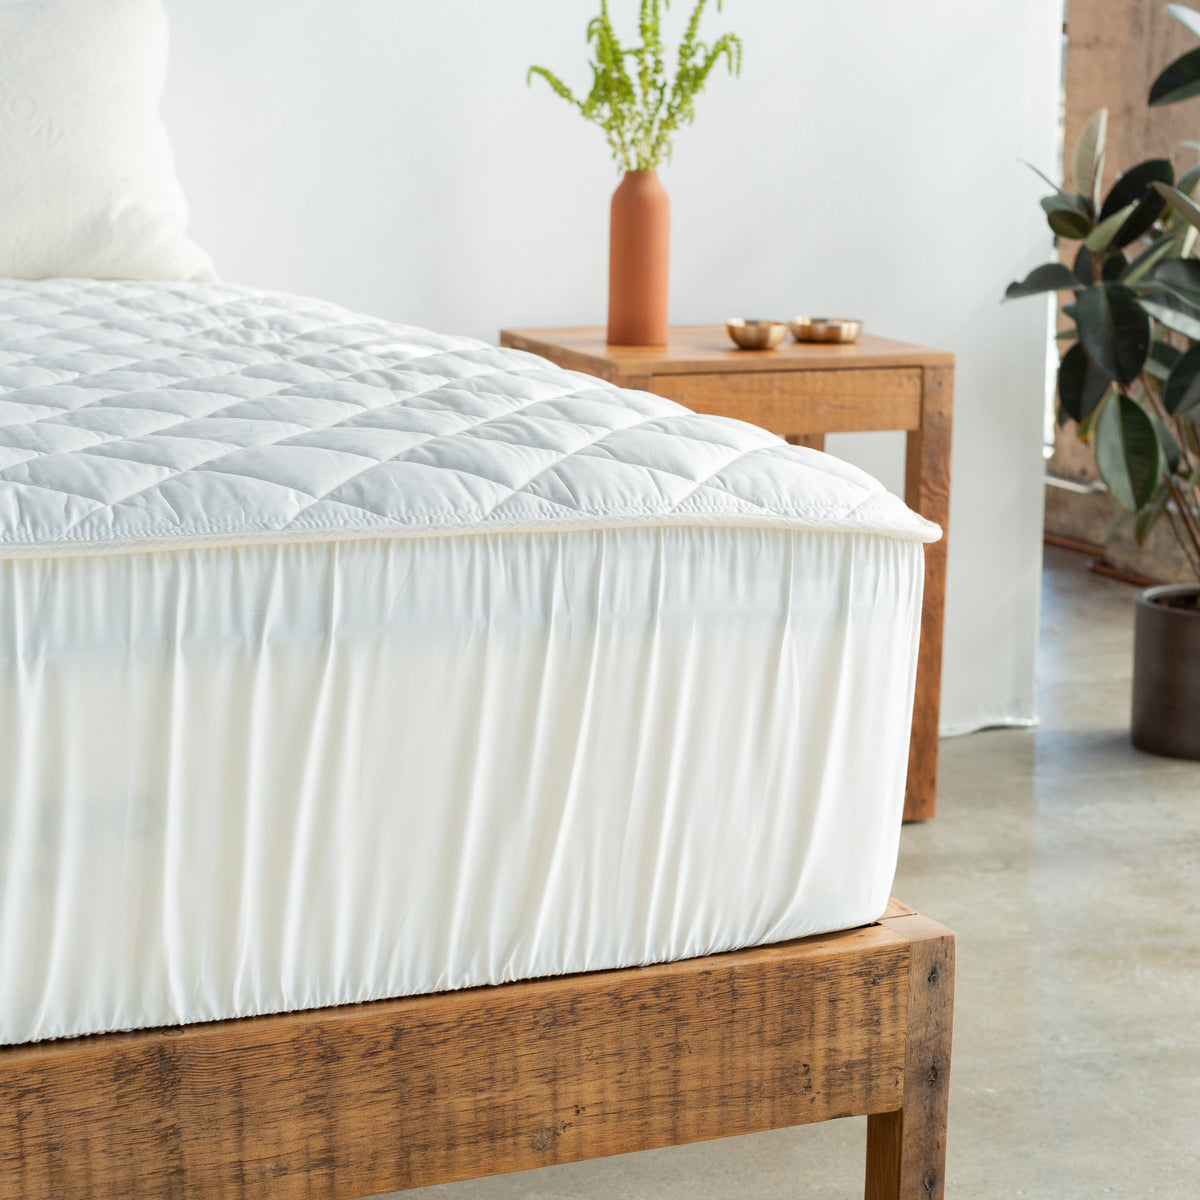 Avocado Green Mattress Organic Pad Protector handmade in US USA Los Angeles cotton quilted